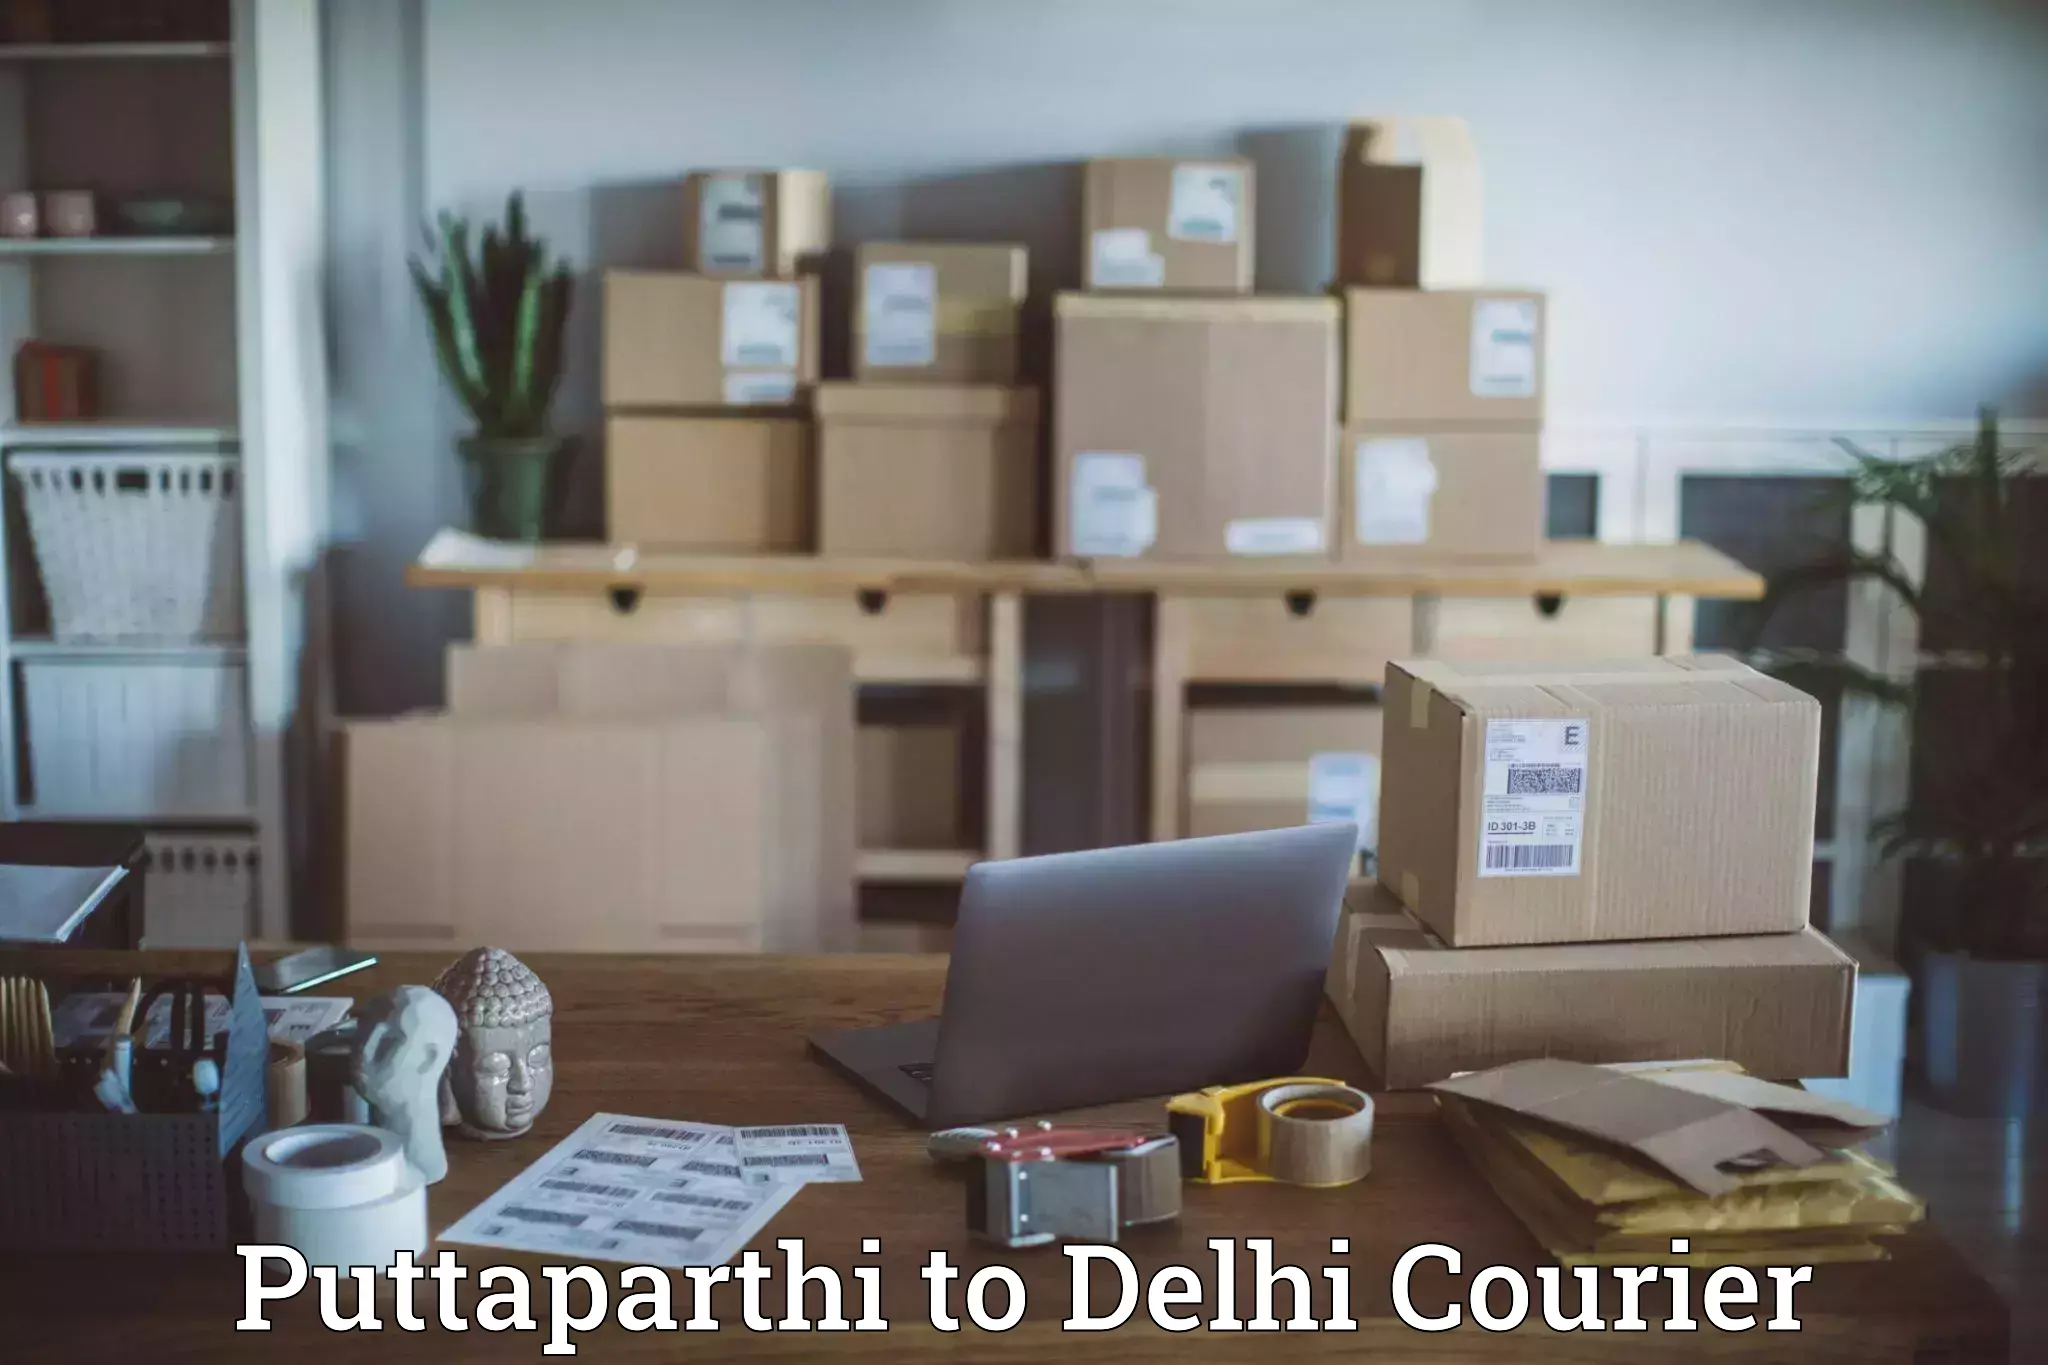 Reliable delivery network Puttaparthi to East Delhi